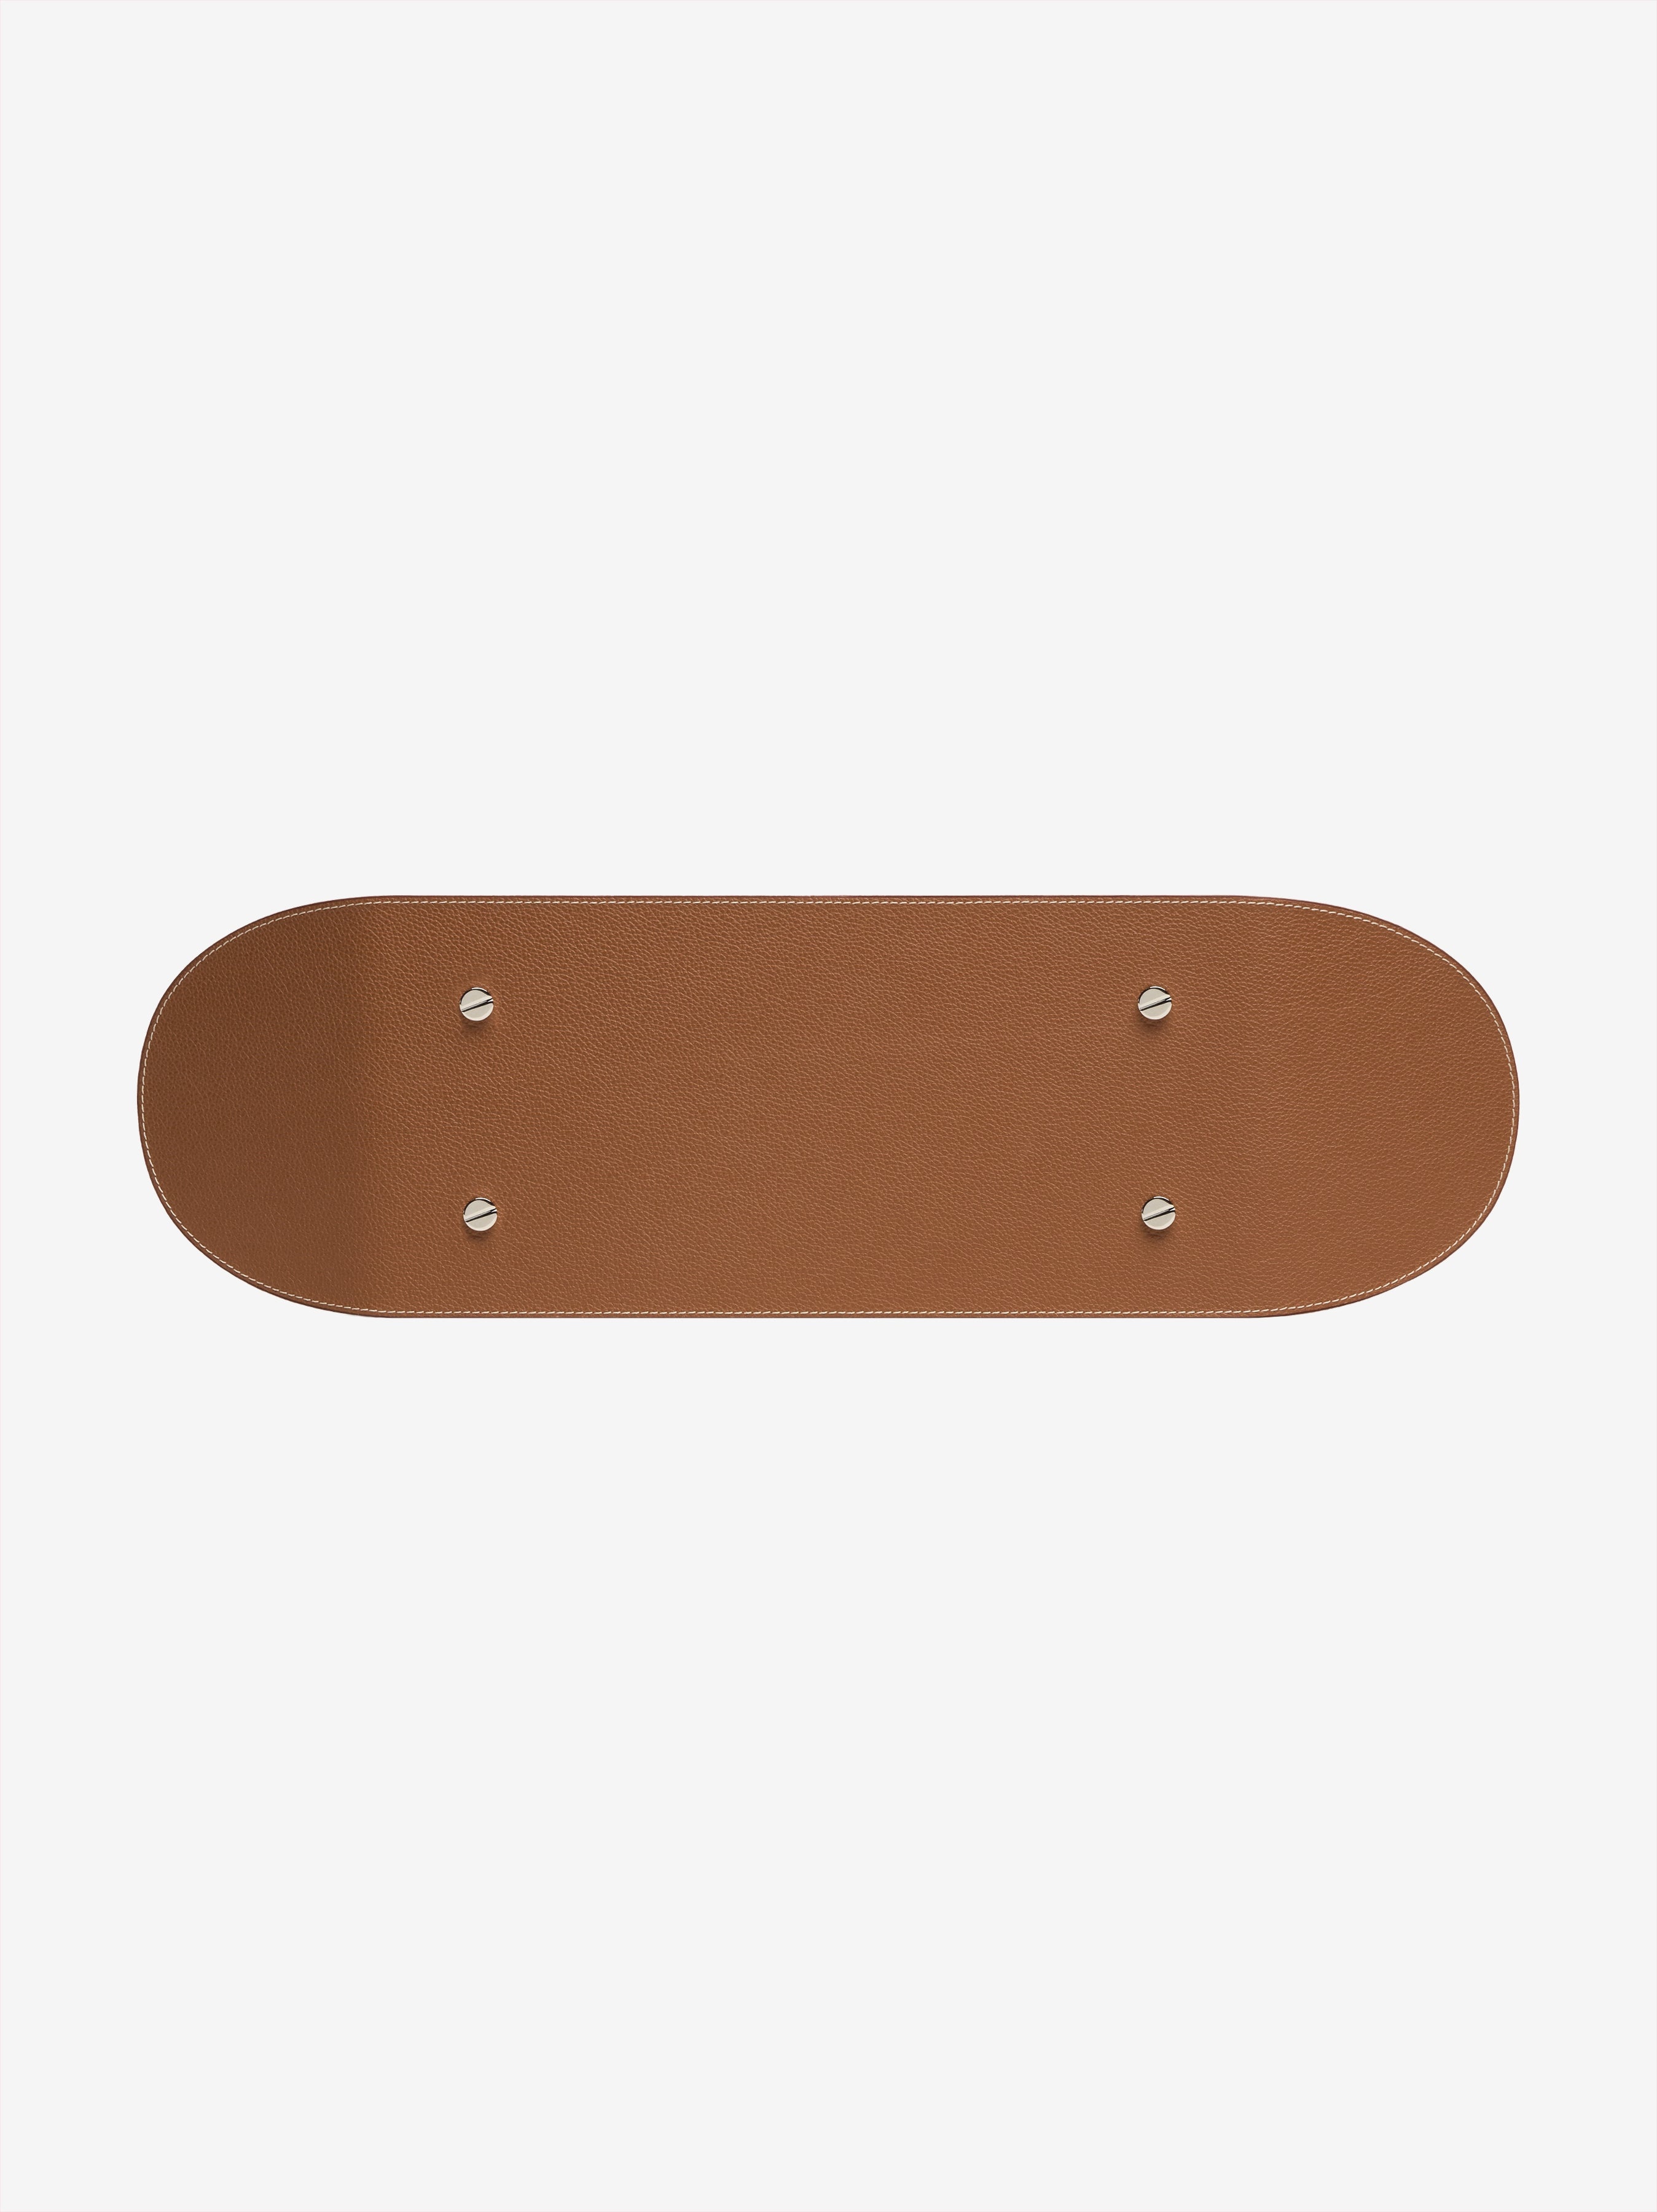 EXCLUSIVE LEATHER SKATE DECK CATCH TRAY - 7